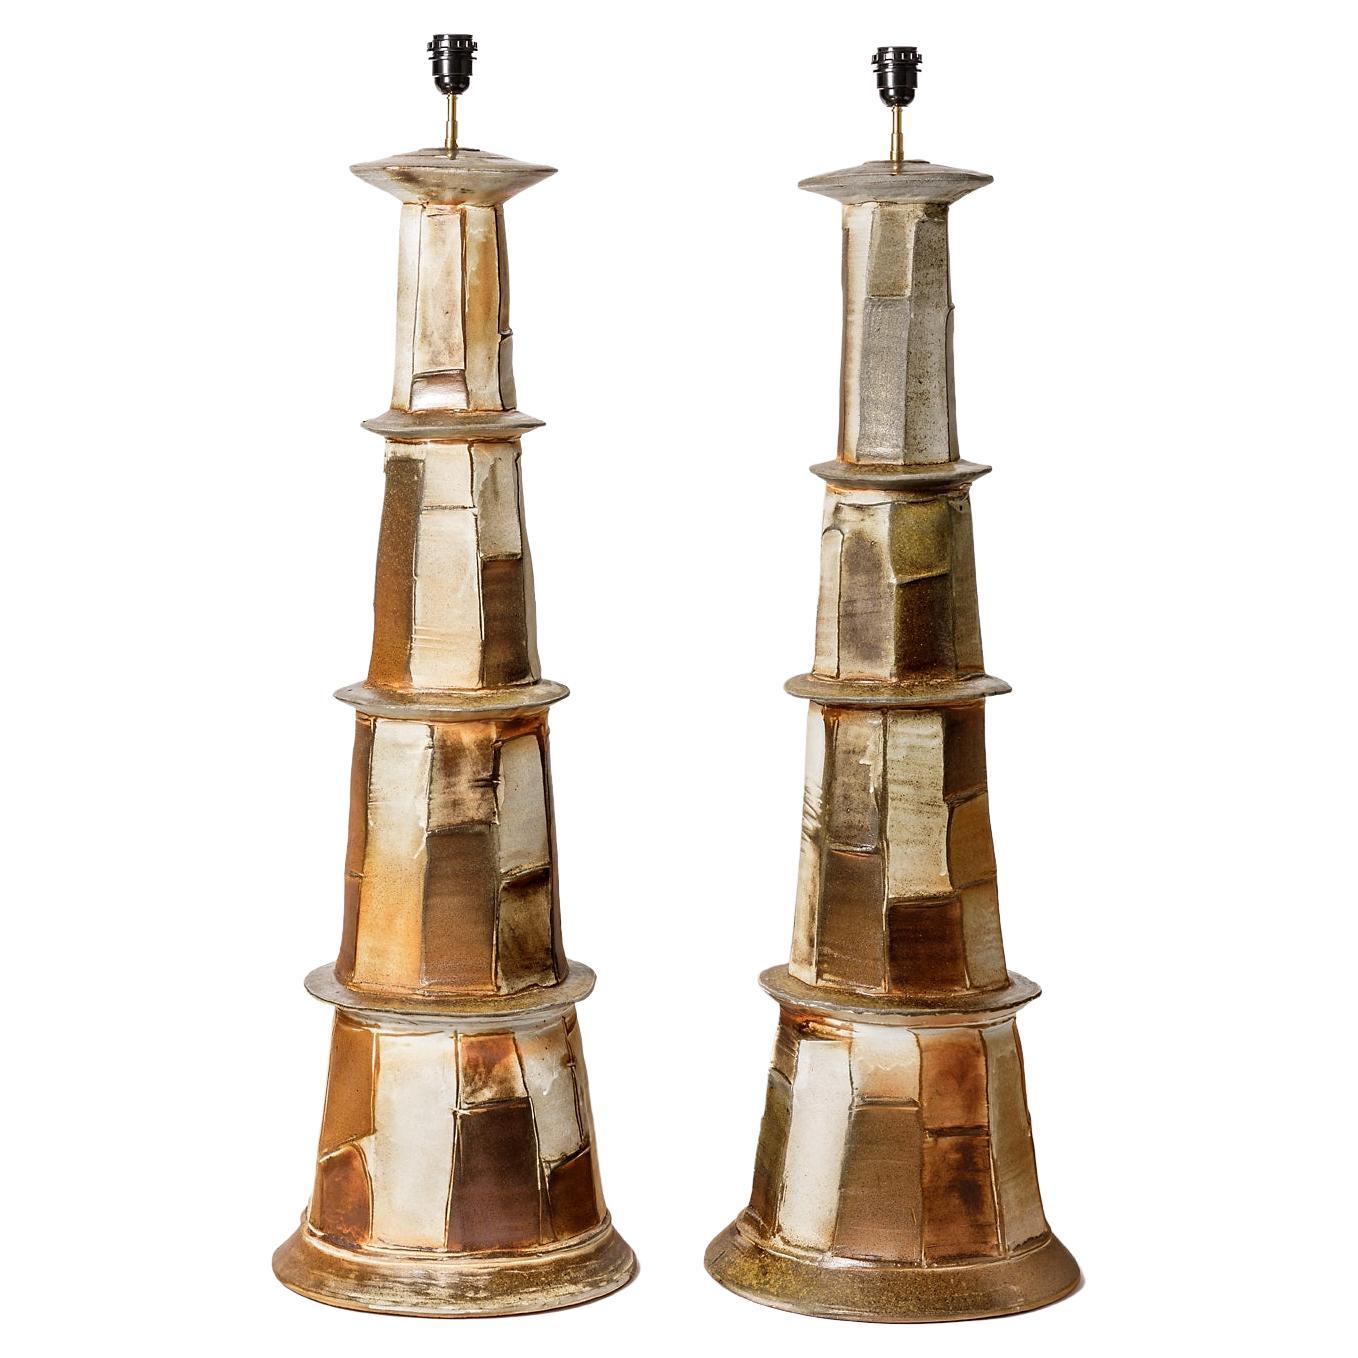 Large Pair of Brown and White Stoneware Ceramic Floor or Table Lamps by Roz